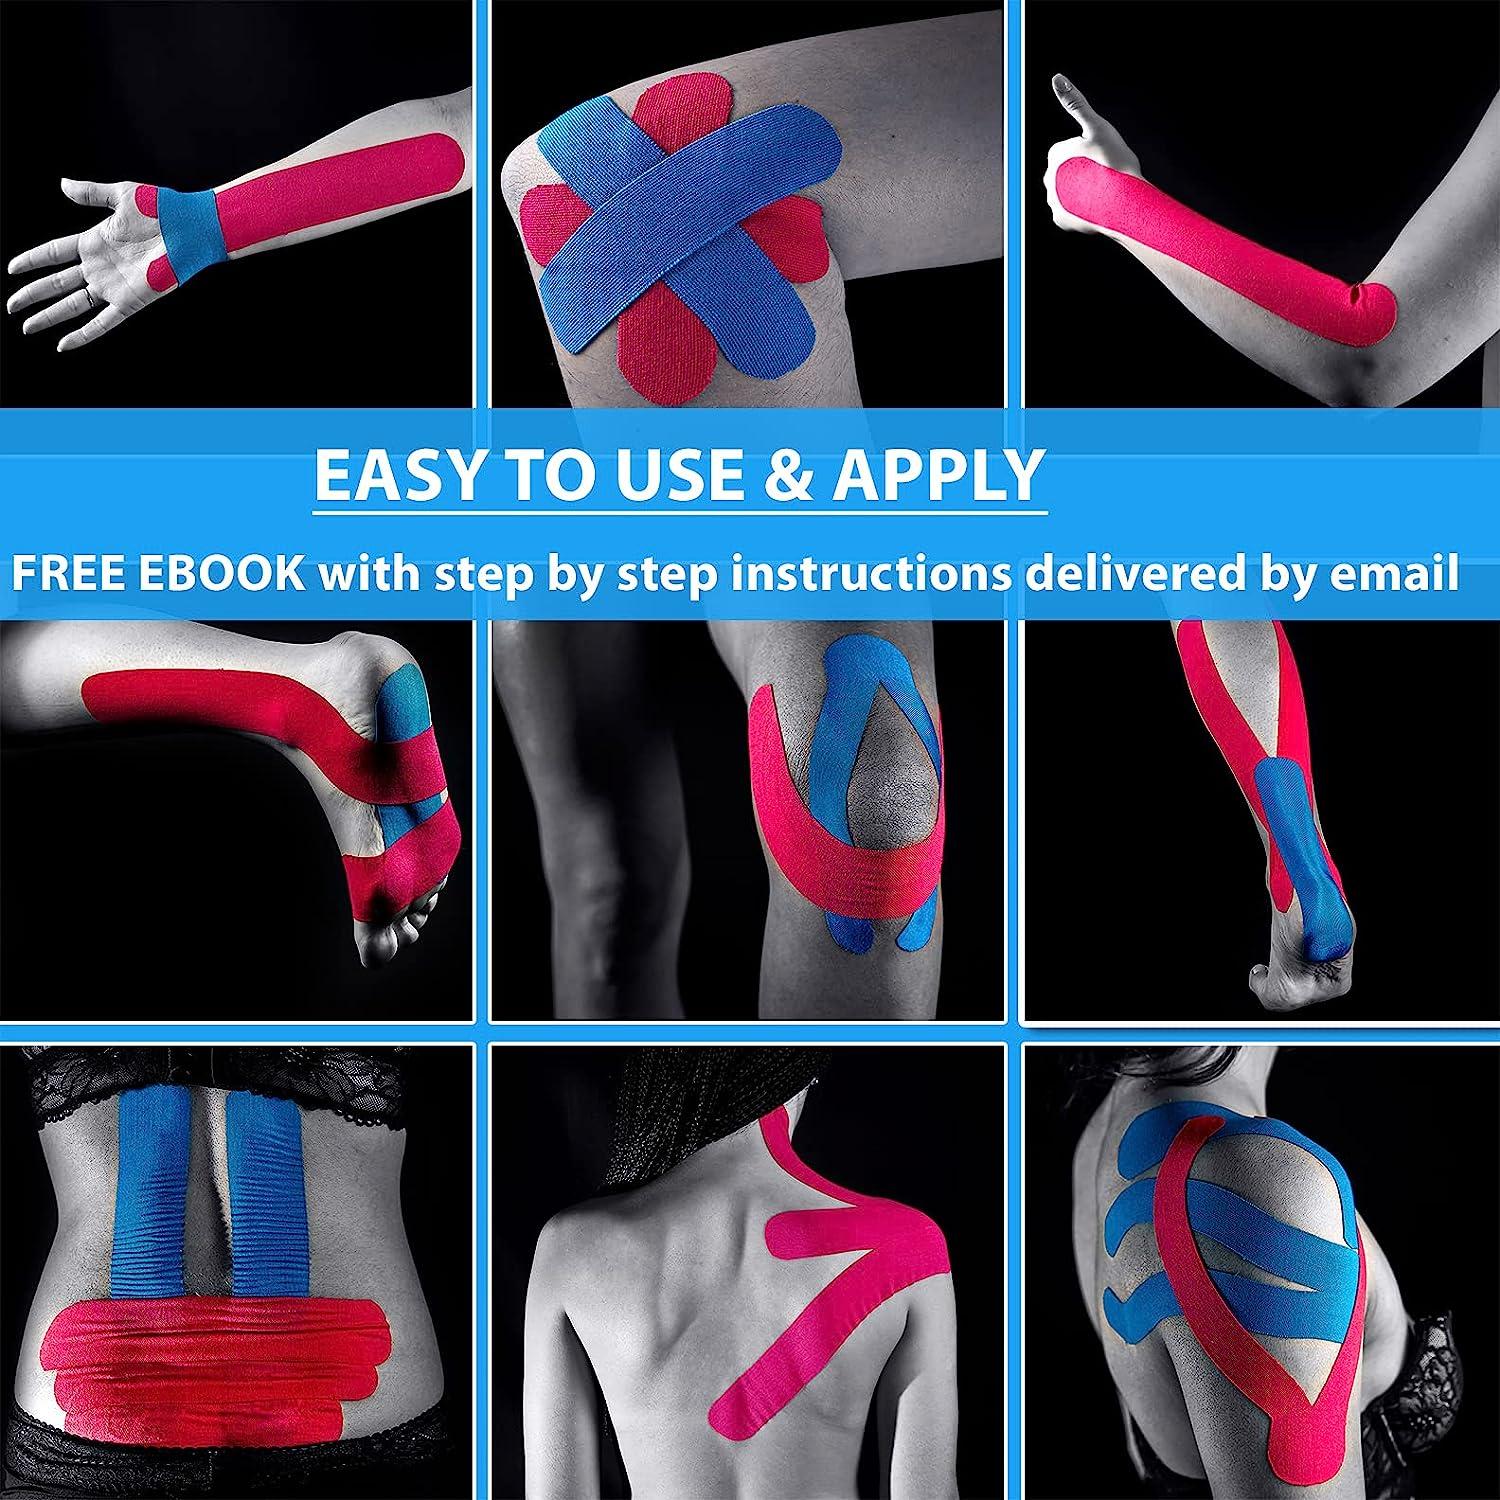 How To KT Tape A Knee – Easy Kinesio Tape Guide